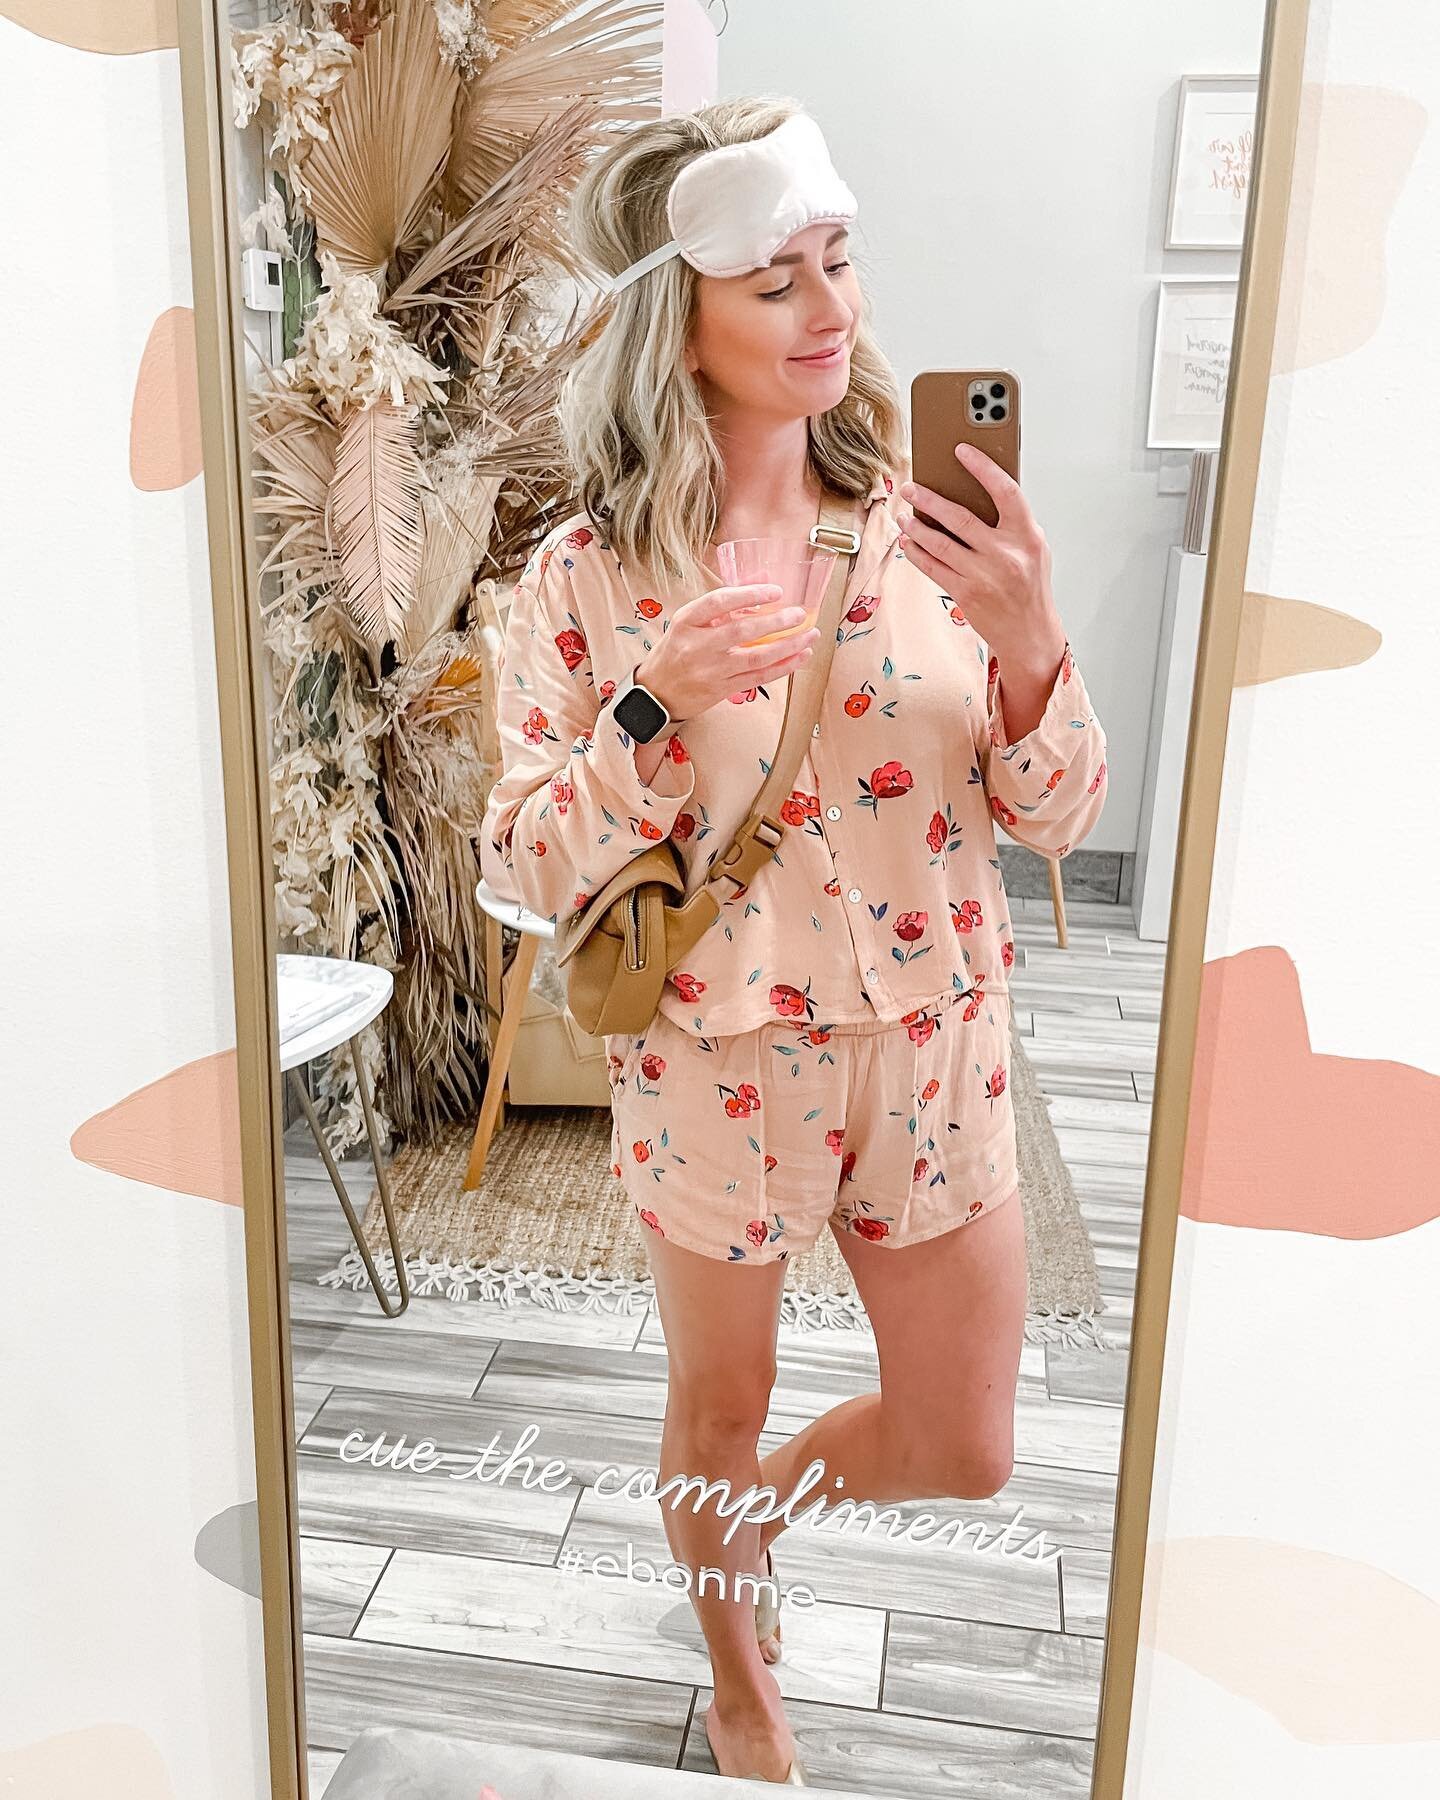 When the theme is pajama party&hellip;and you accessorize with your daughter&rsquo;s sleep mask 😂

Had a blast last night at the beautiful @thegrovespa and shopping at a local favorite, @eb.and.co!

This was my first time checking out @thegrovespa, 